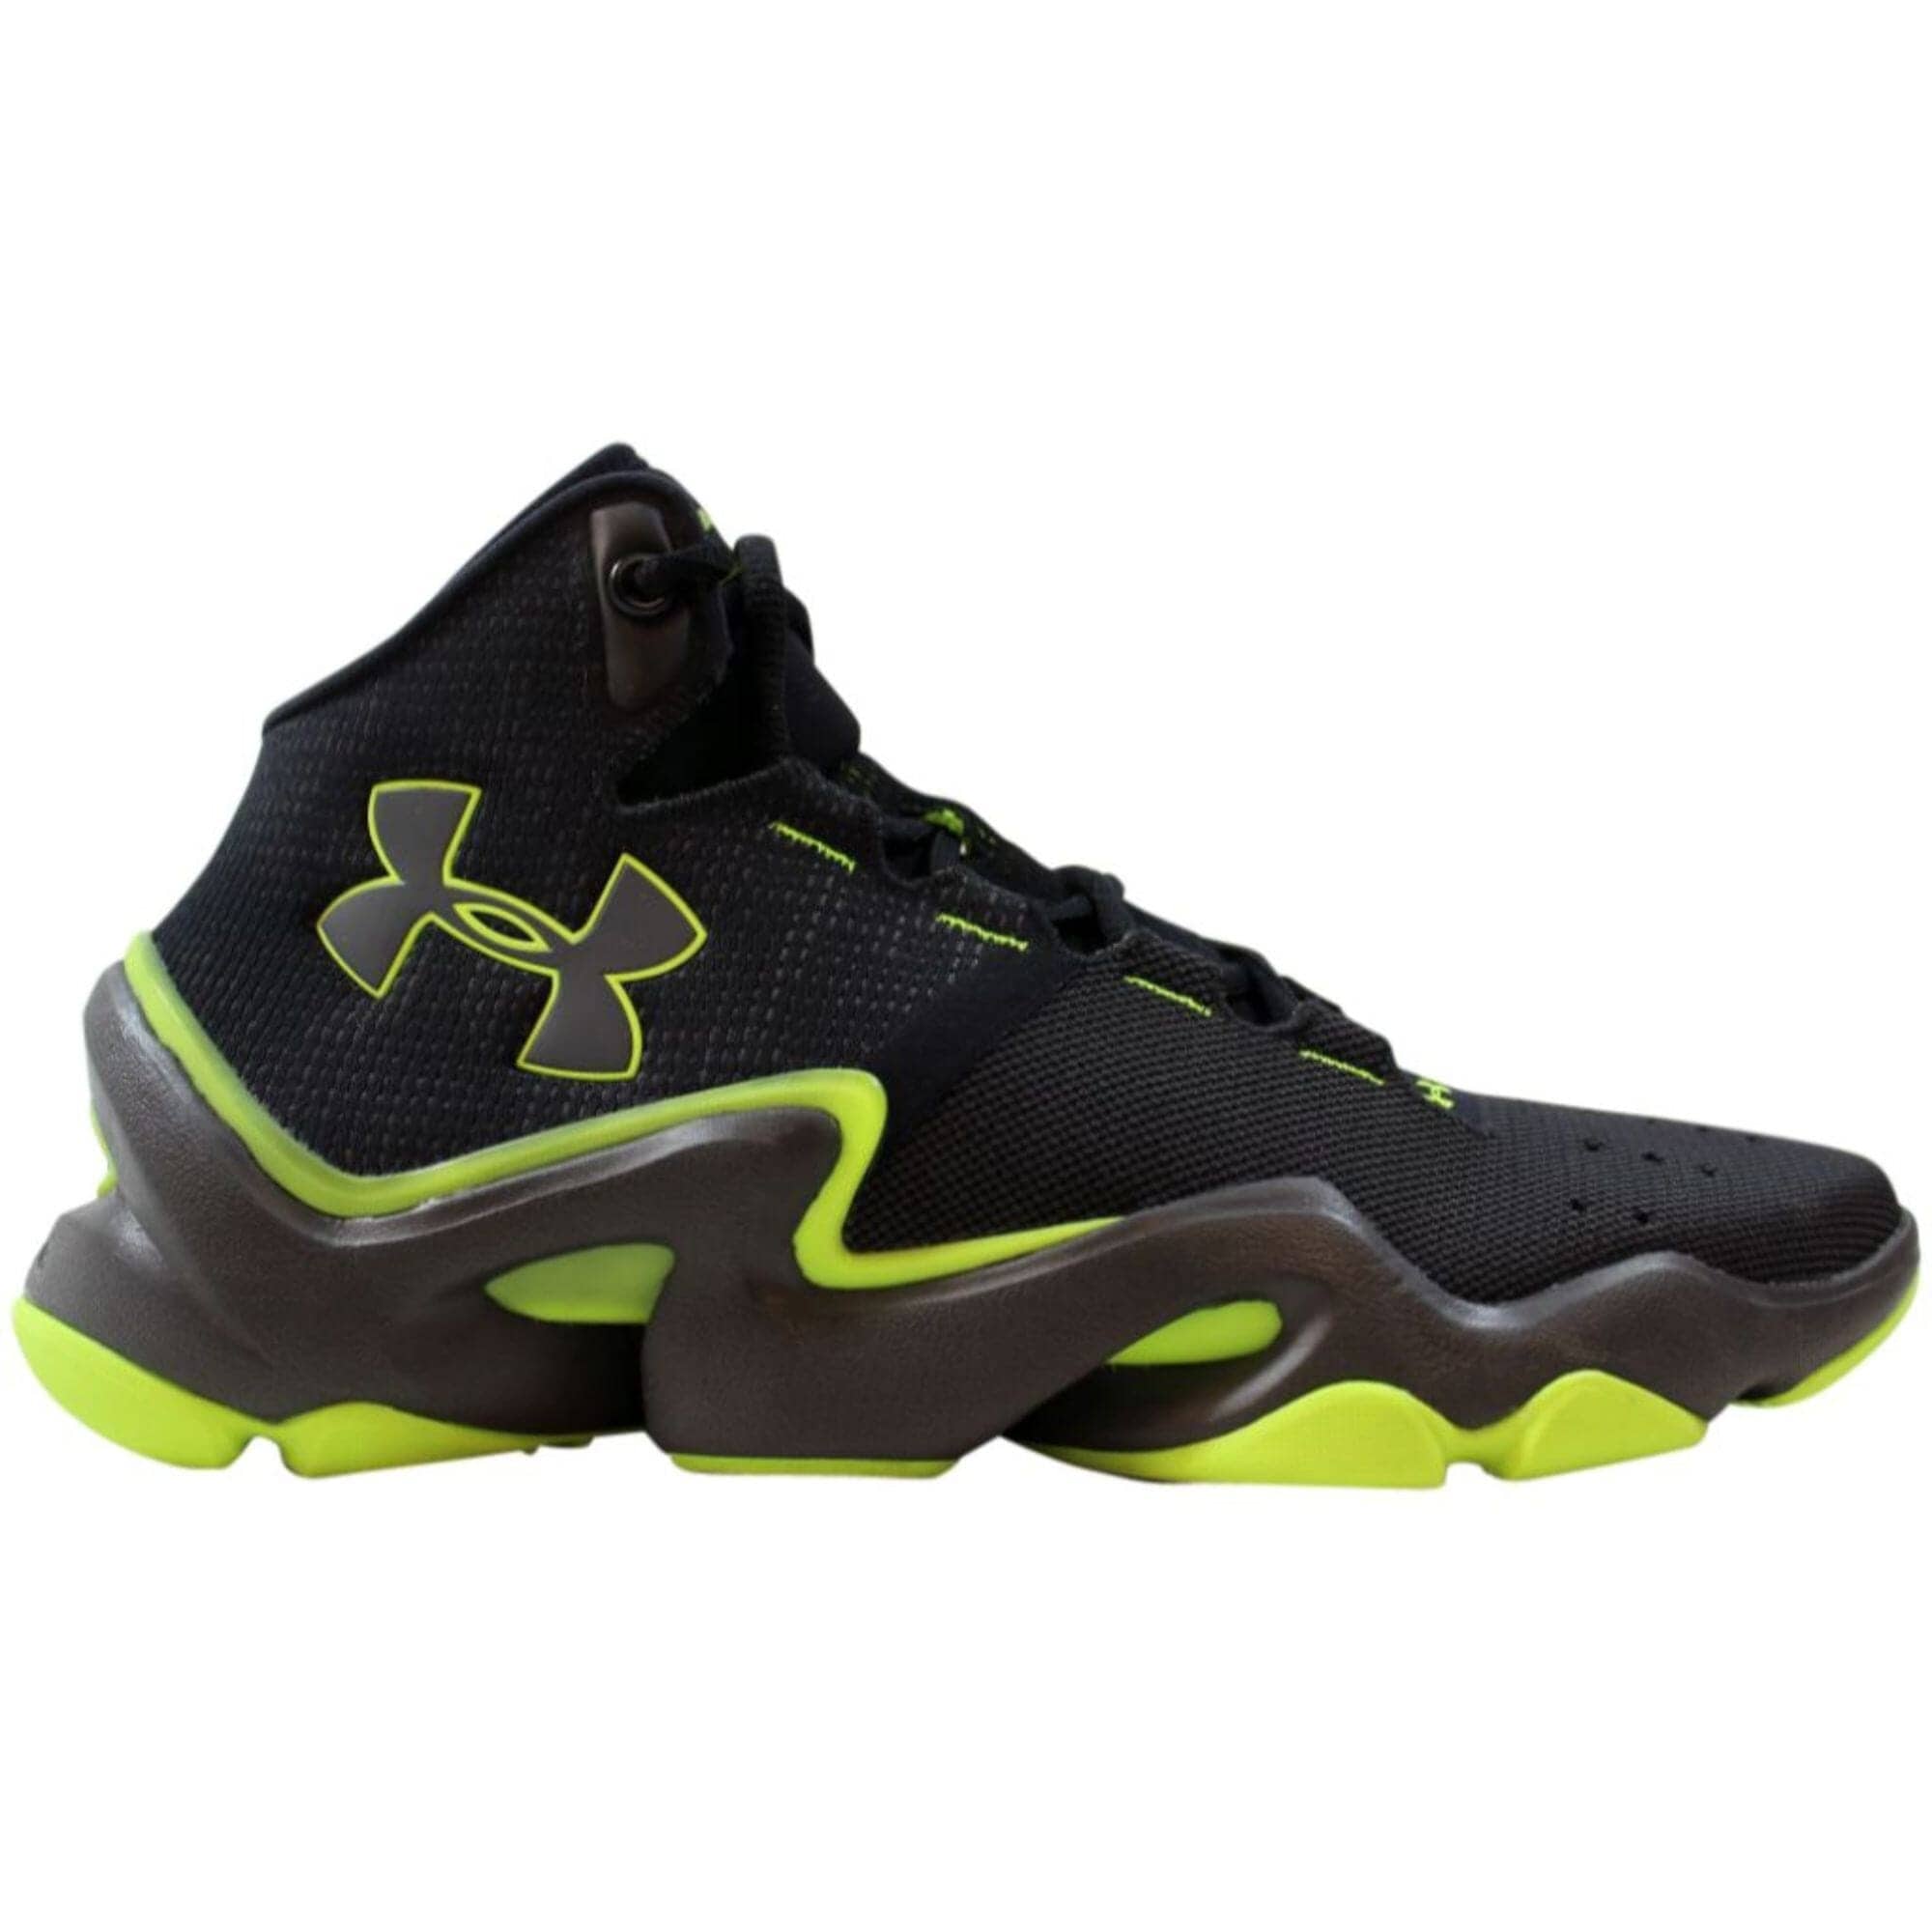 yellow and black under armour shoes